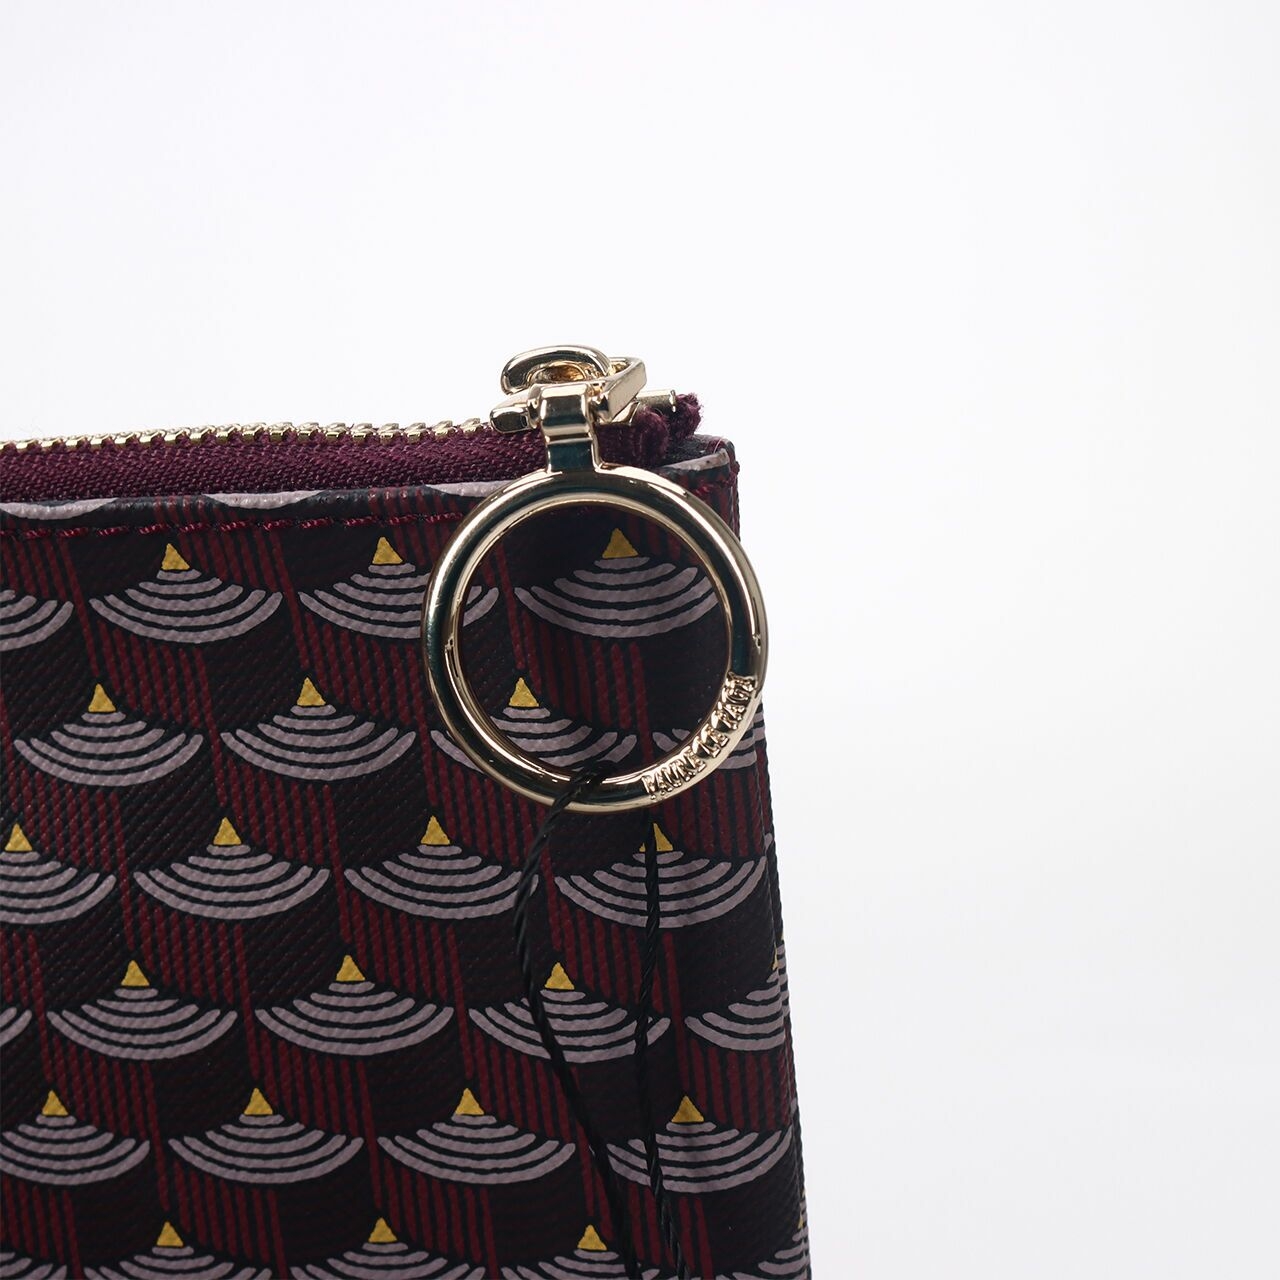 Faure Le Page Pouch Maroon